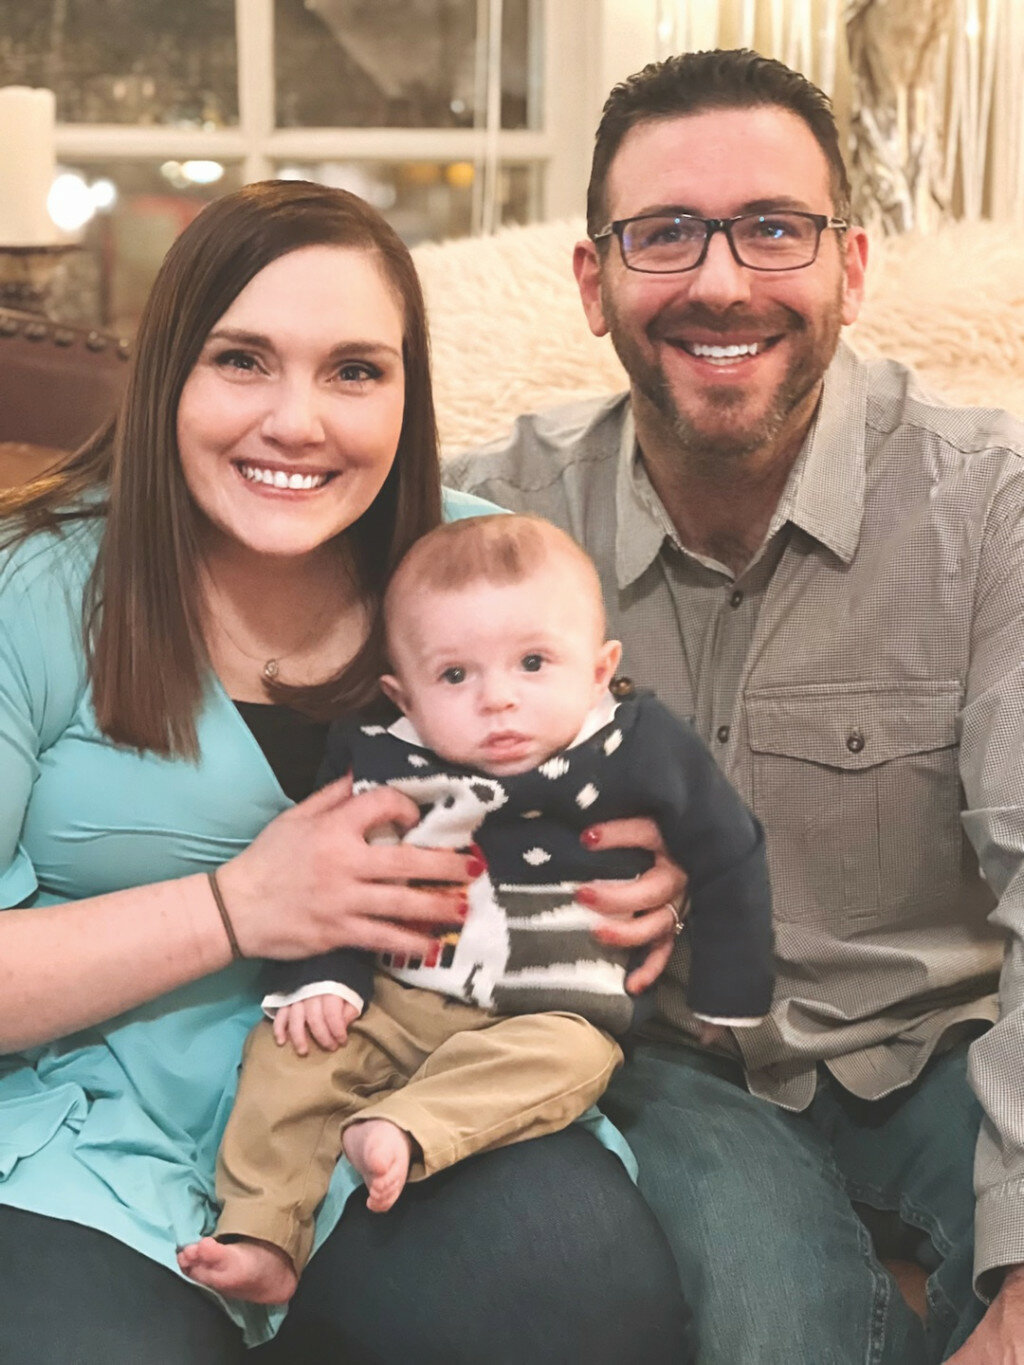 Cole Wingen, the new manager for Skroch Funeral Chapel, is pictured here with his wife, Jessica, and the couple’s five-month-old son, Jack. The family will be moving into the home above Skroch Funeral Chapel in Flandreau as soon as remodeling is done.